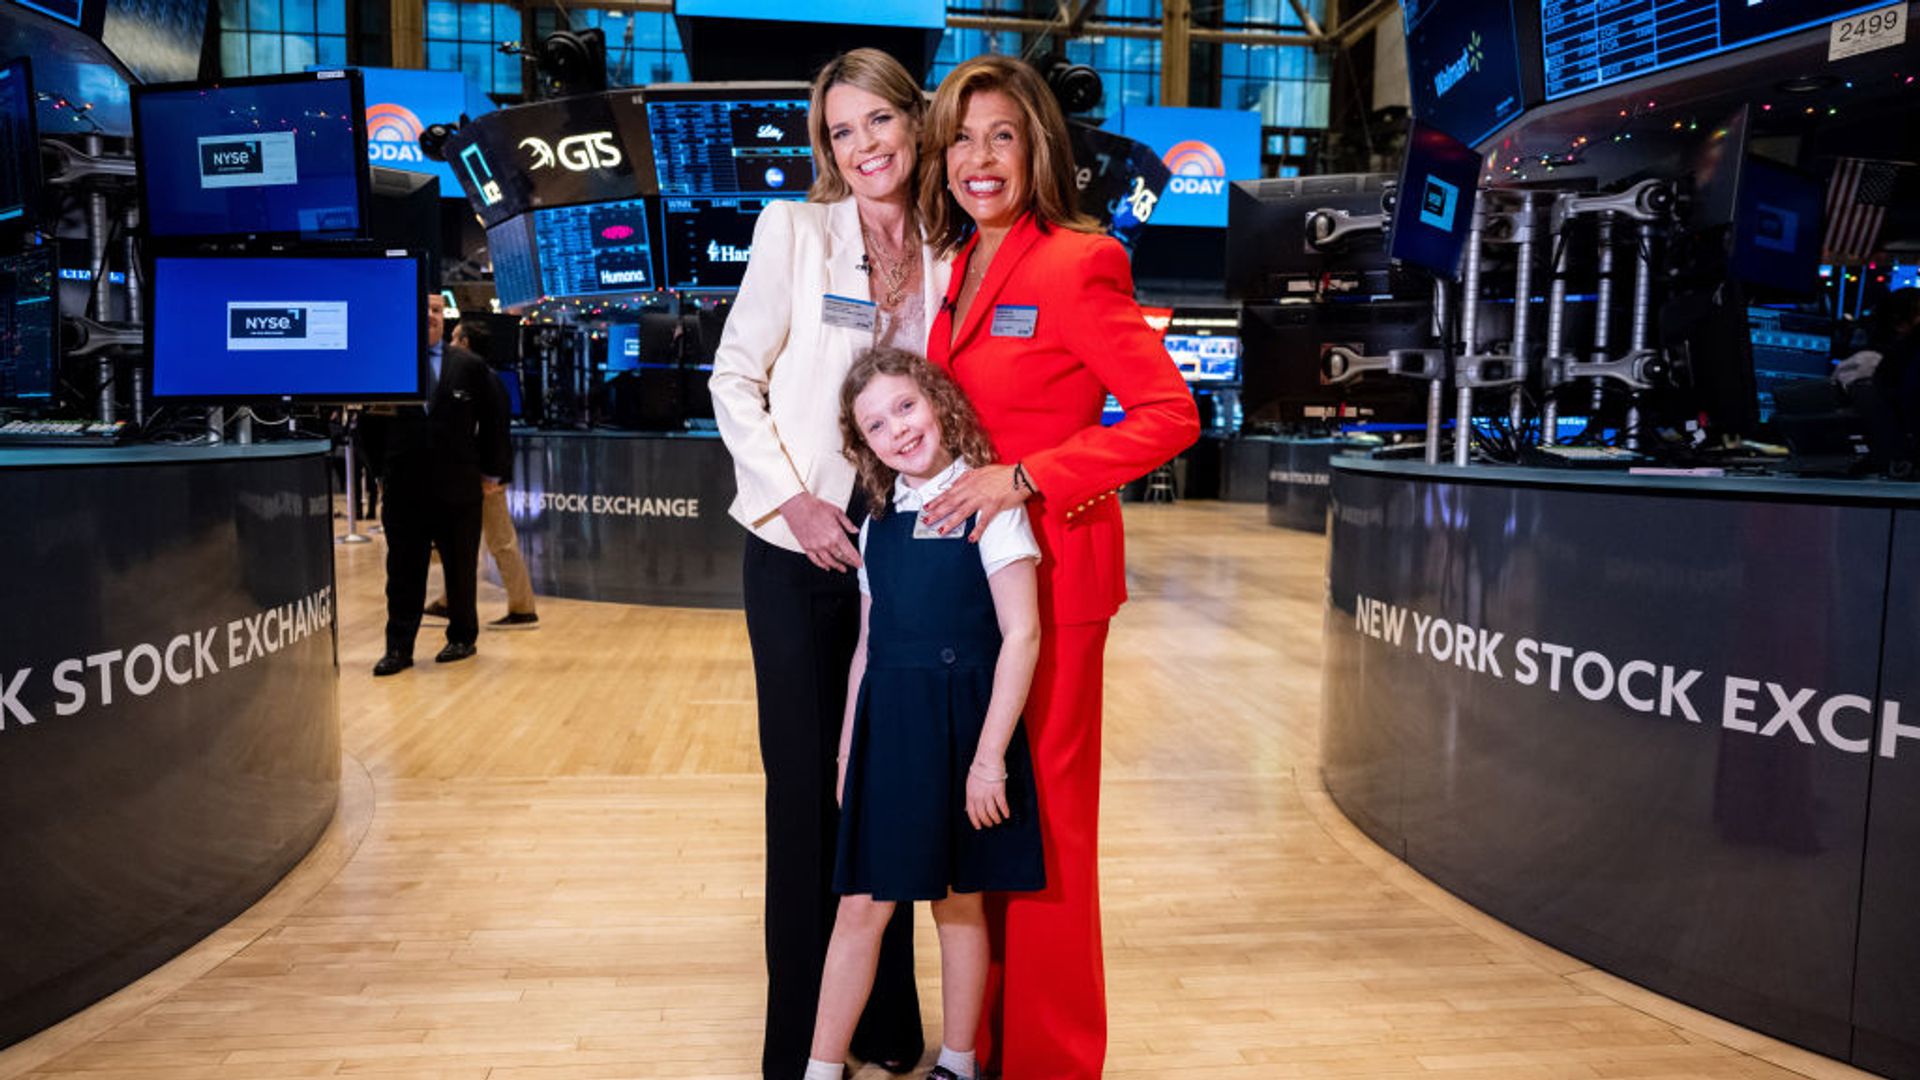 Savannah with her daughter Vale and co-star Hoda Kotb